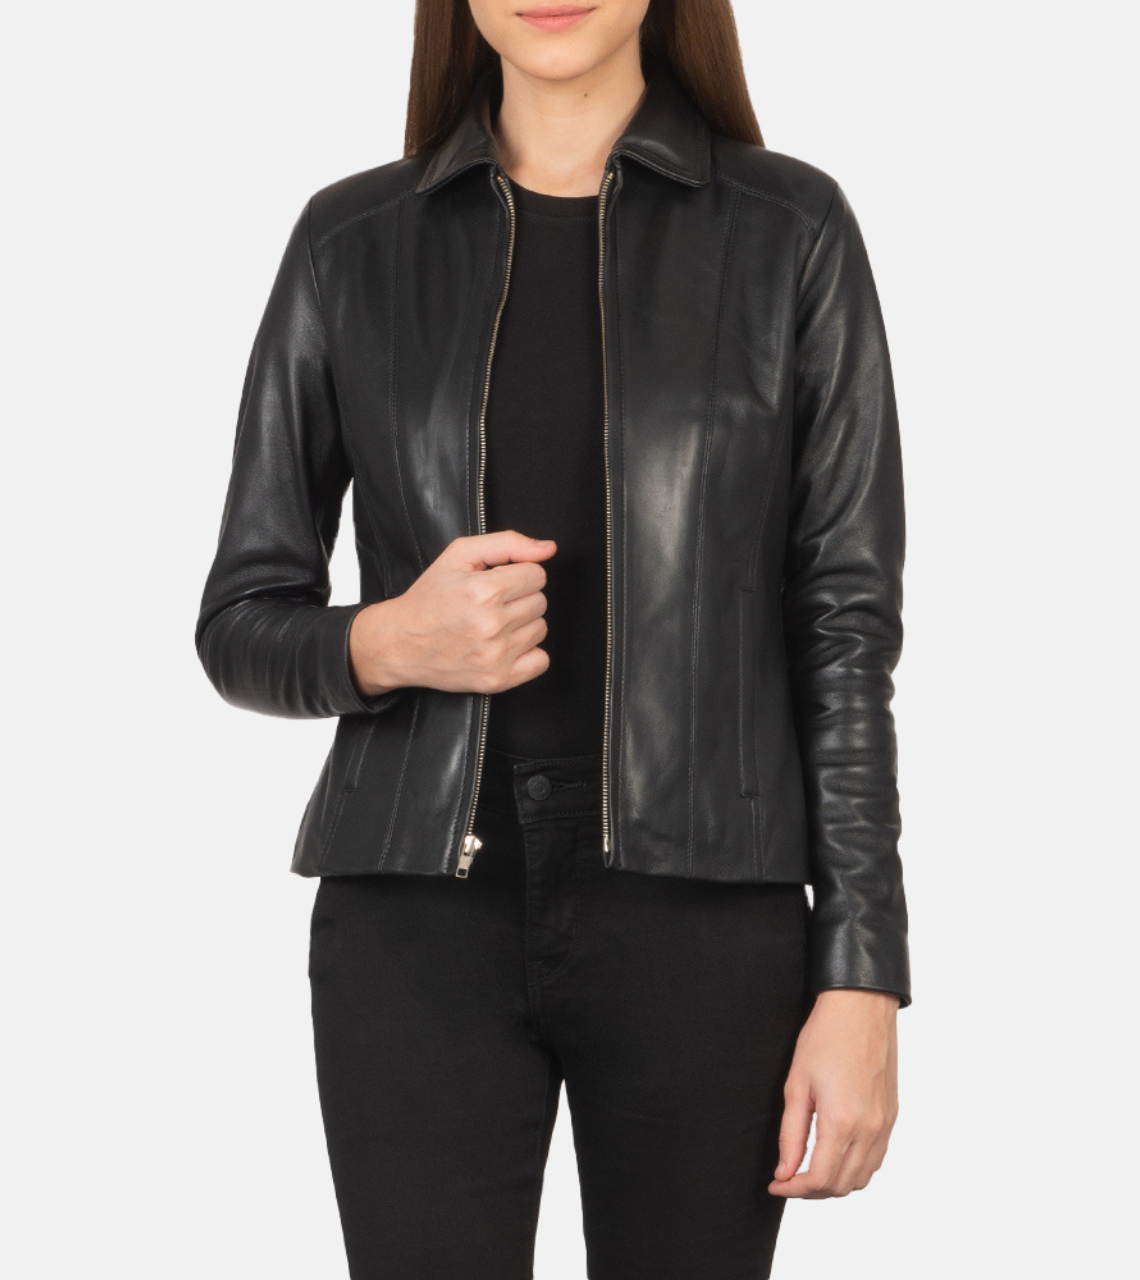 Cotextras Leather Jacket For Women's